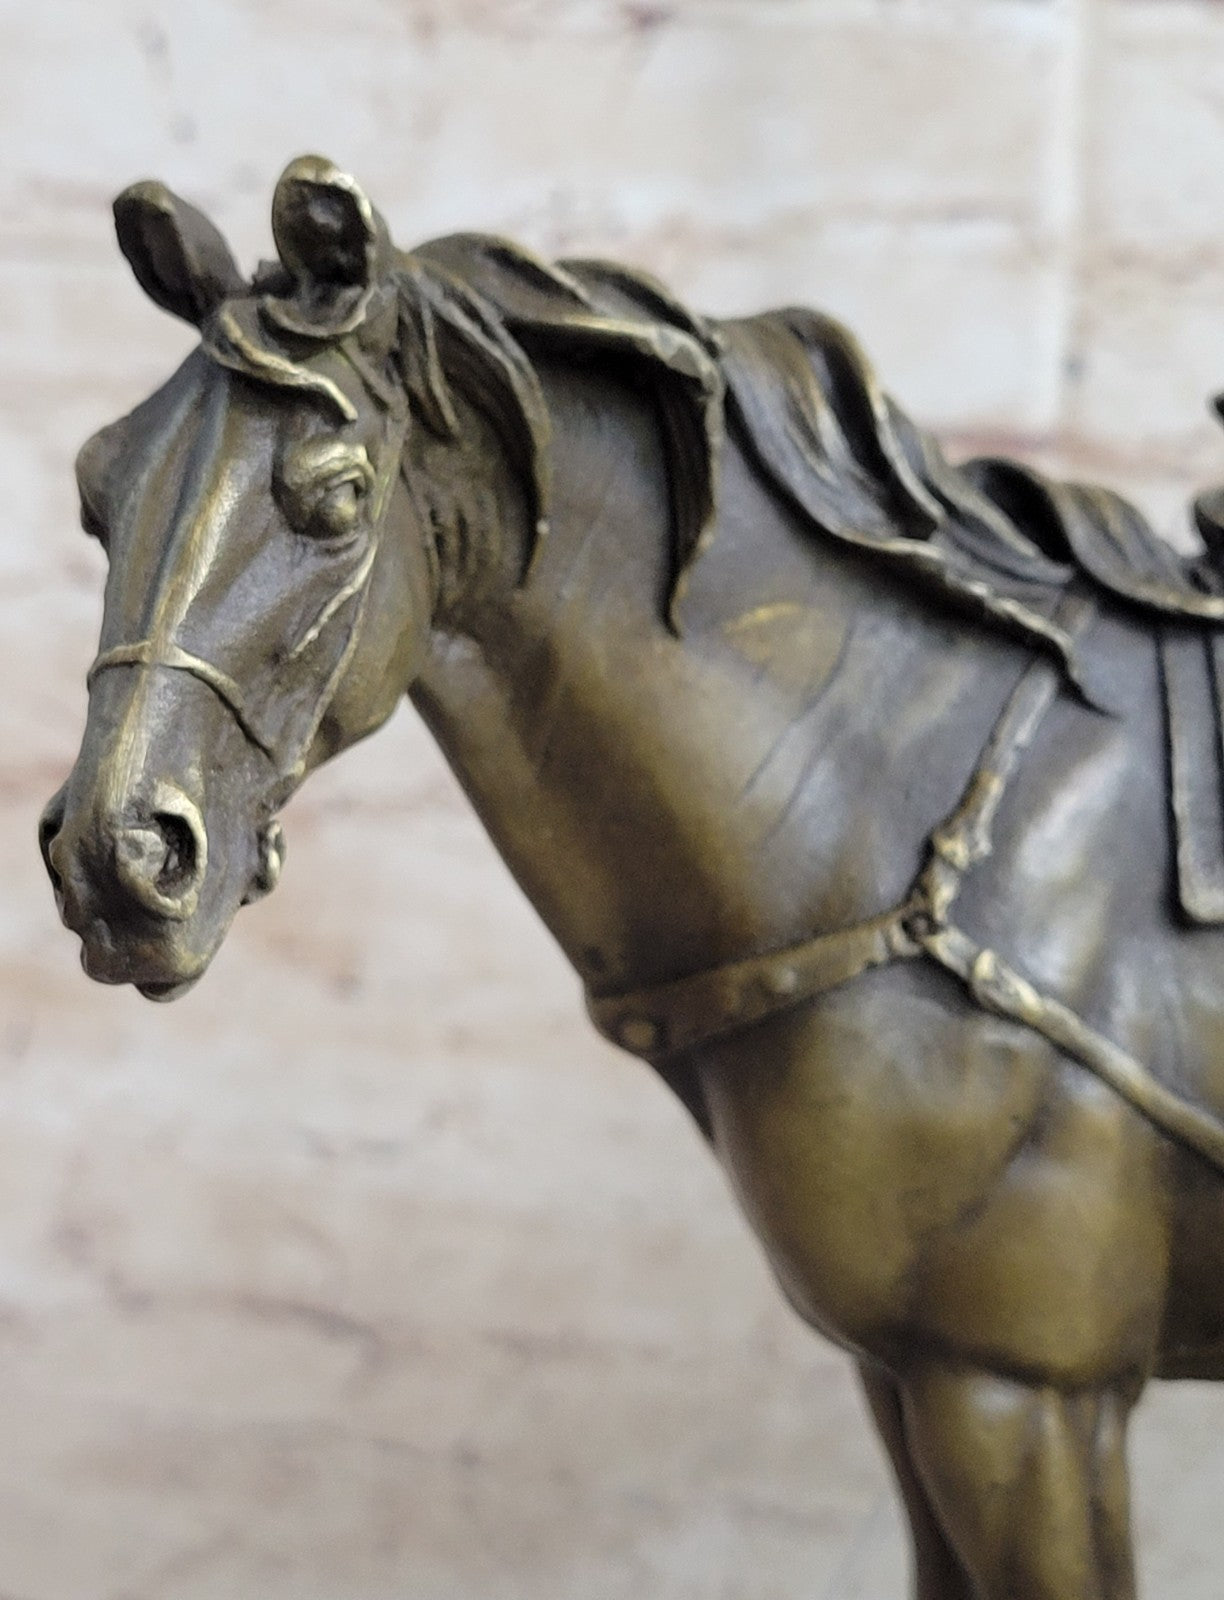 Hand Made Bronze Sculpture Staff Sgt Reckless Horse with saddle Home Decoration